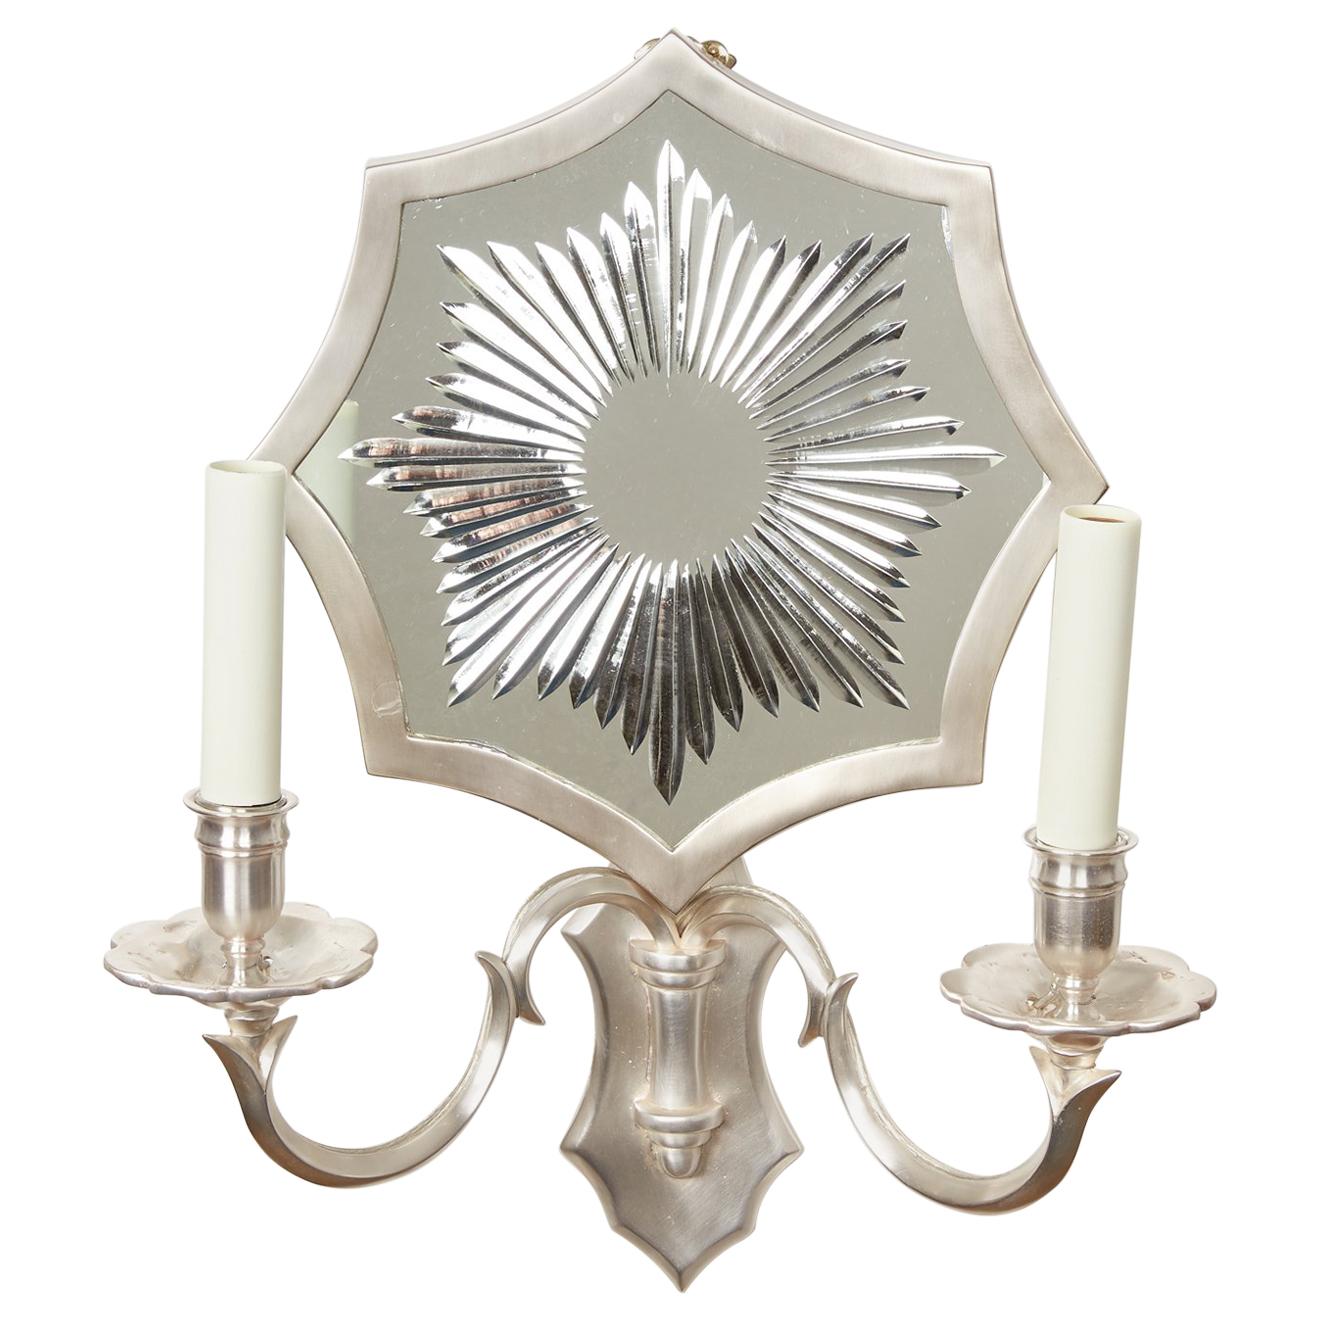 A pair of custom silver plated bronze sconces featuring an octagonal mirrored backplate with wheel cut design. The mirrored sunburst sconce issues two arms and two candelabra sockets per fixture.